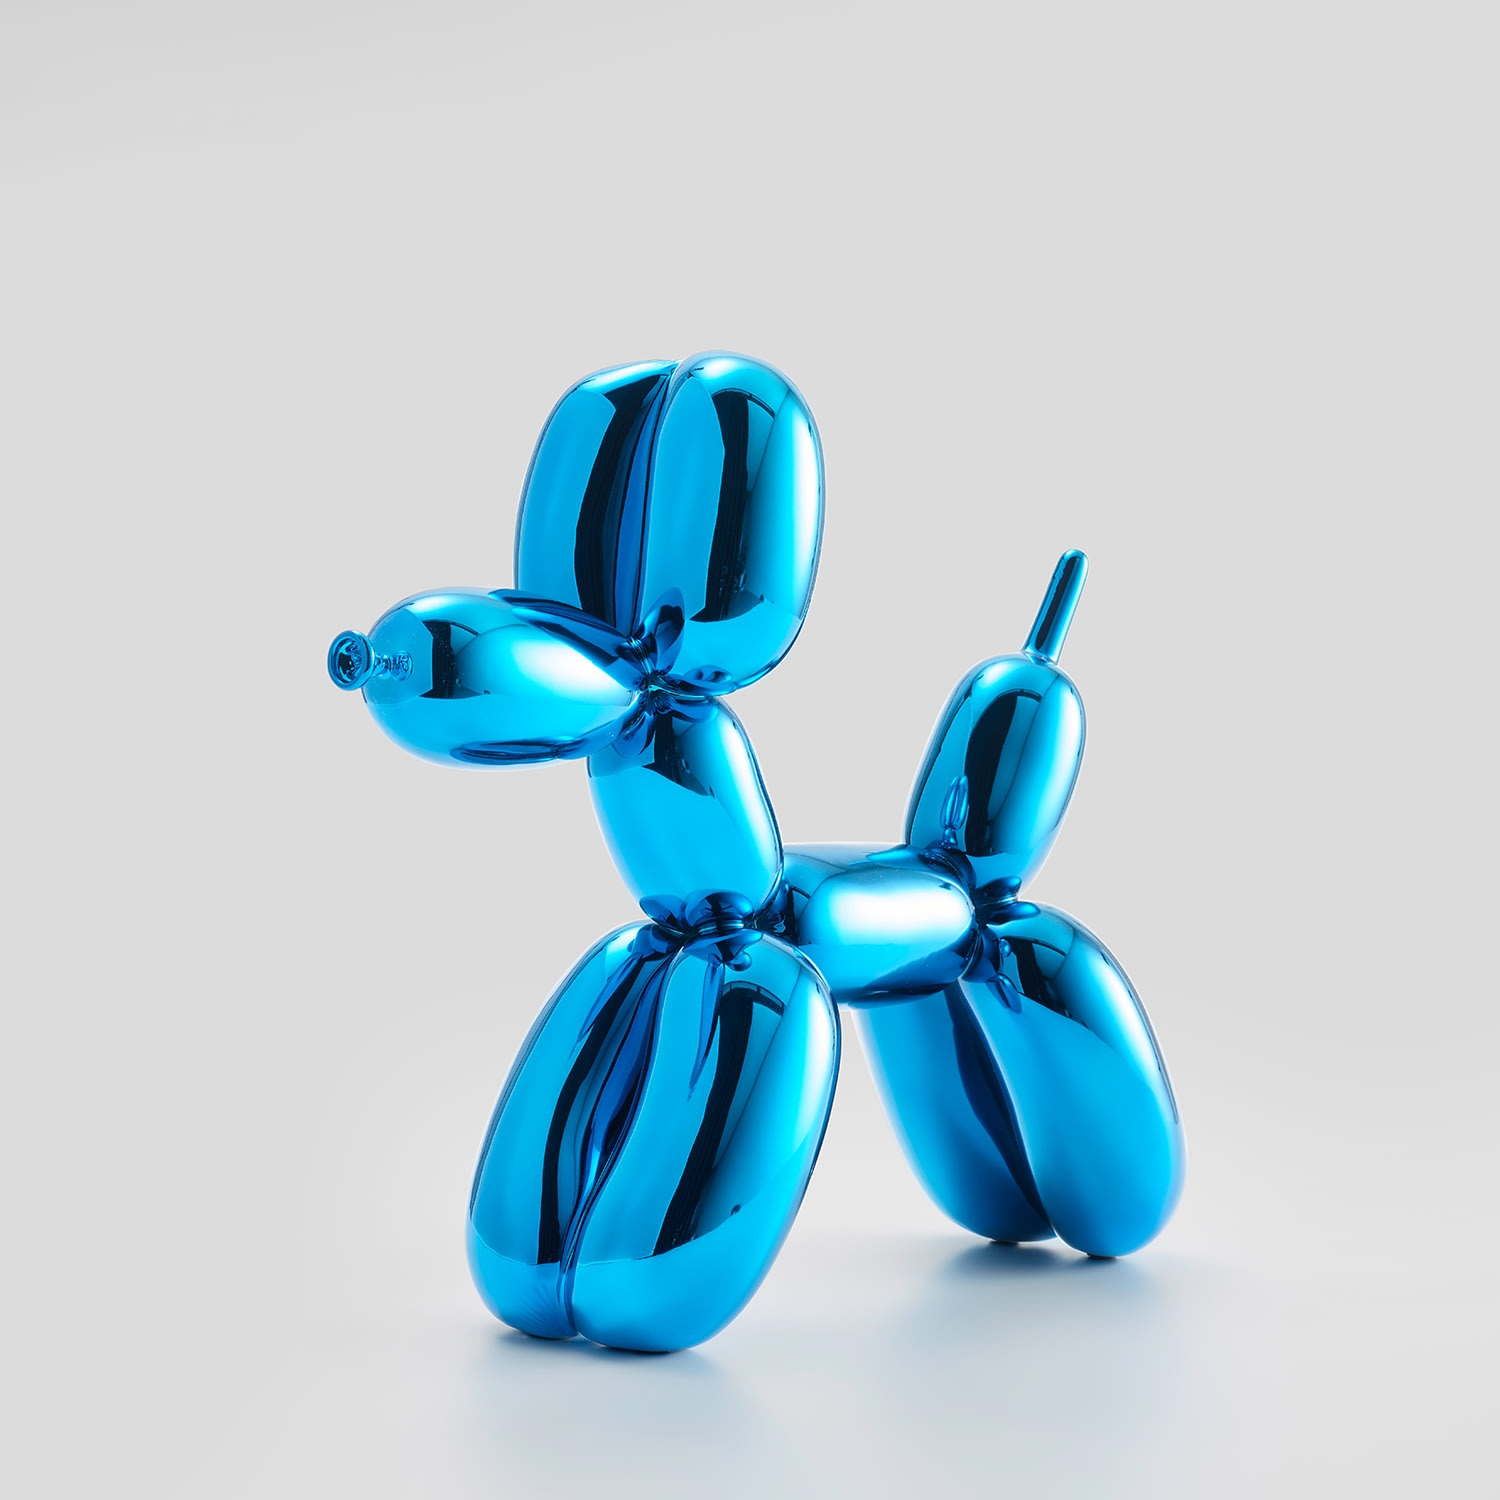 Balloon Dog (Blue) by Jeff Koons, 2021